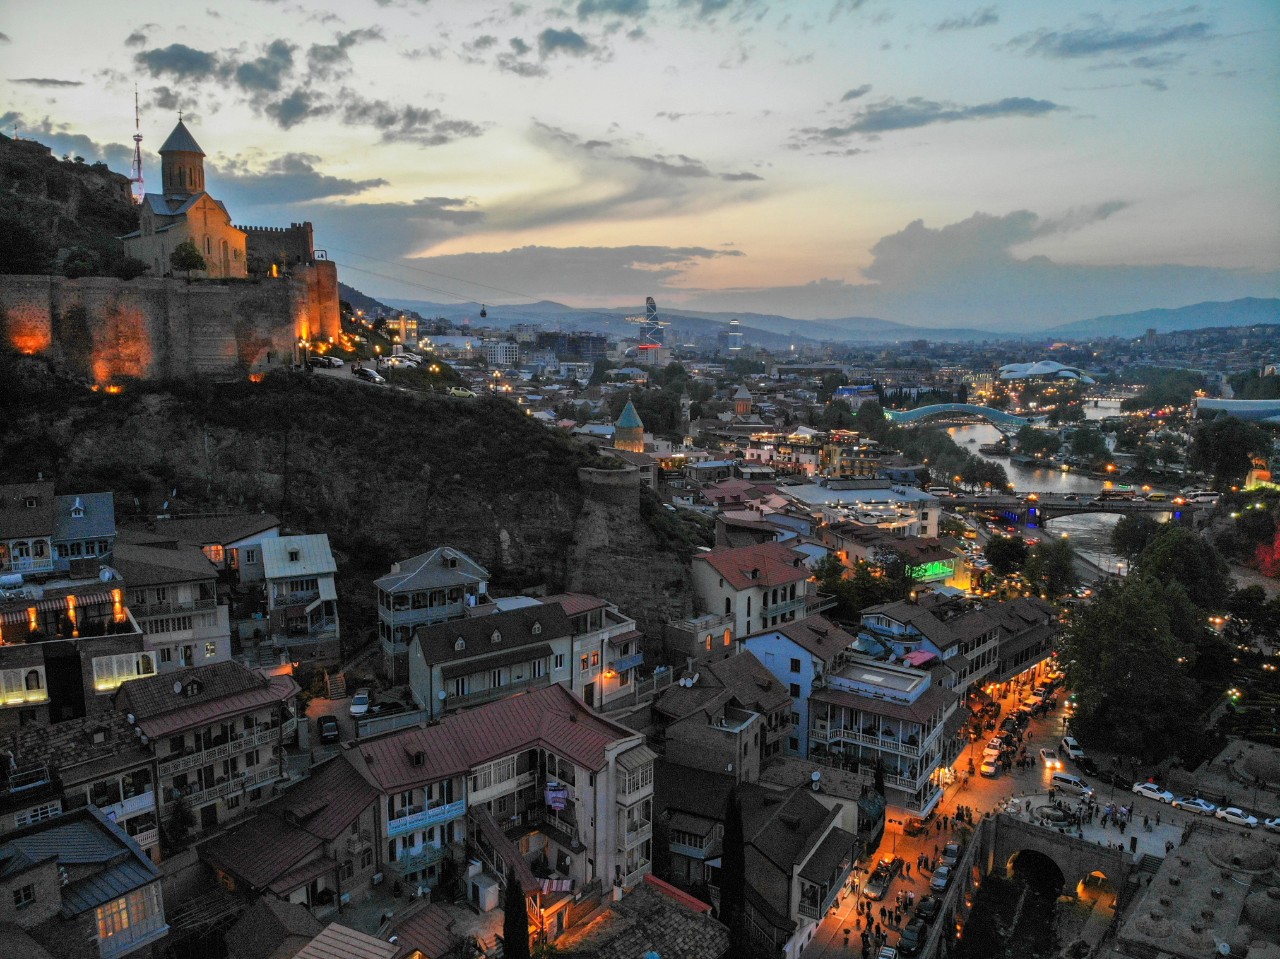 A Travel Guide to Tbilisi Can Help You Have a Better Georgian Holiday